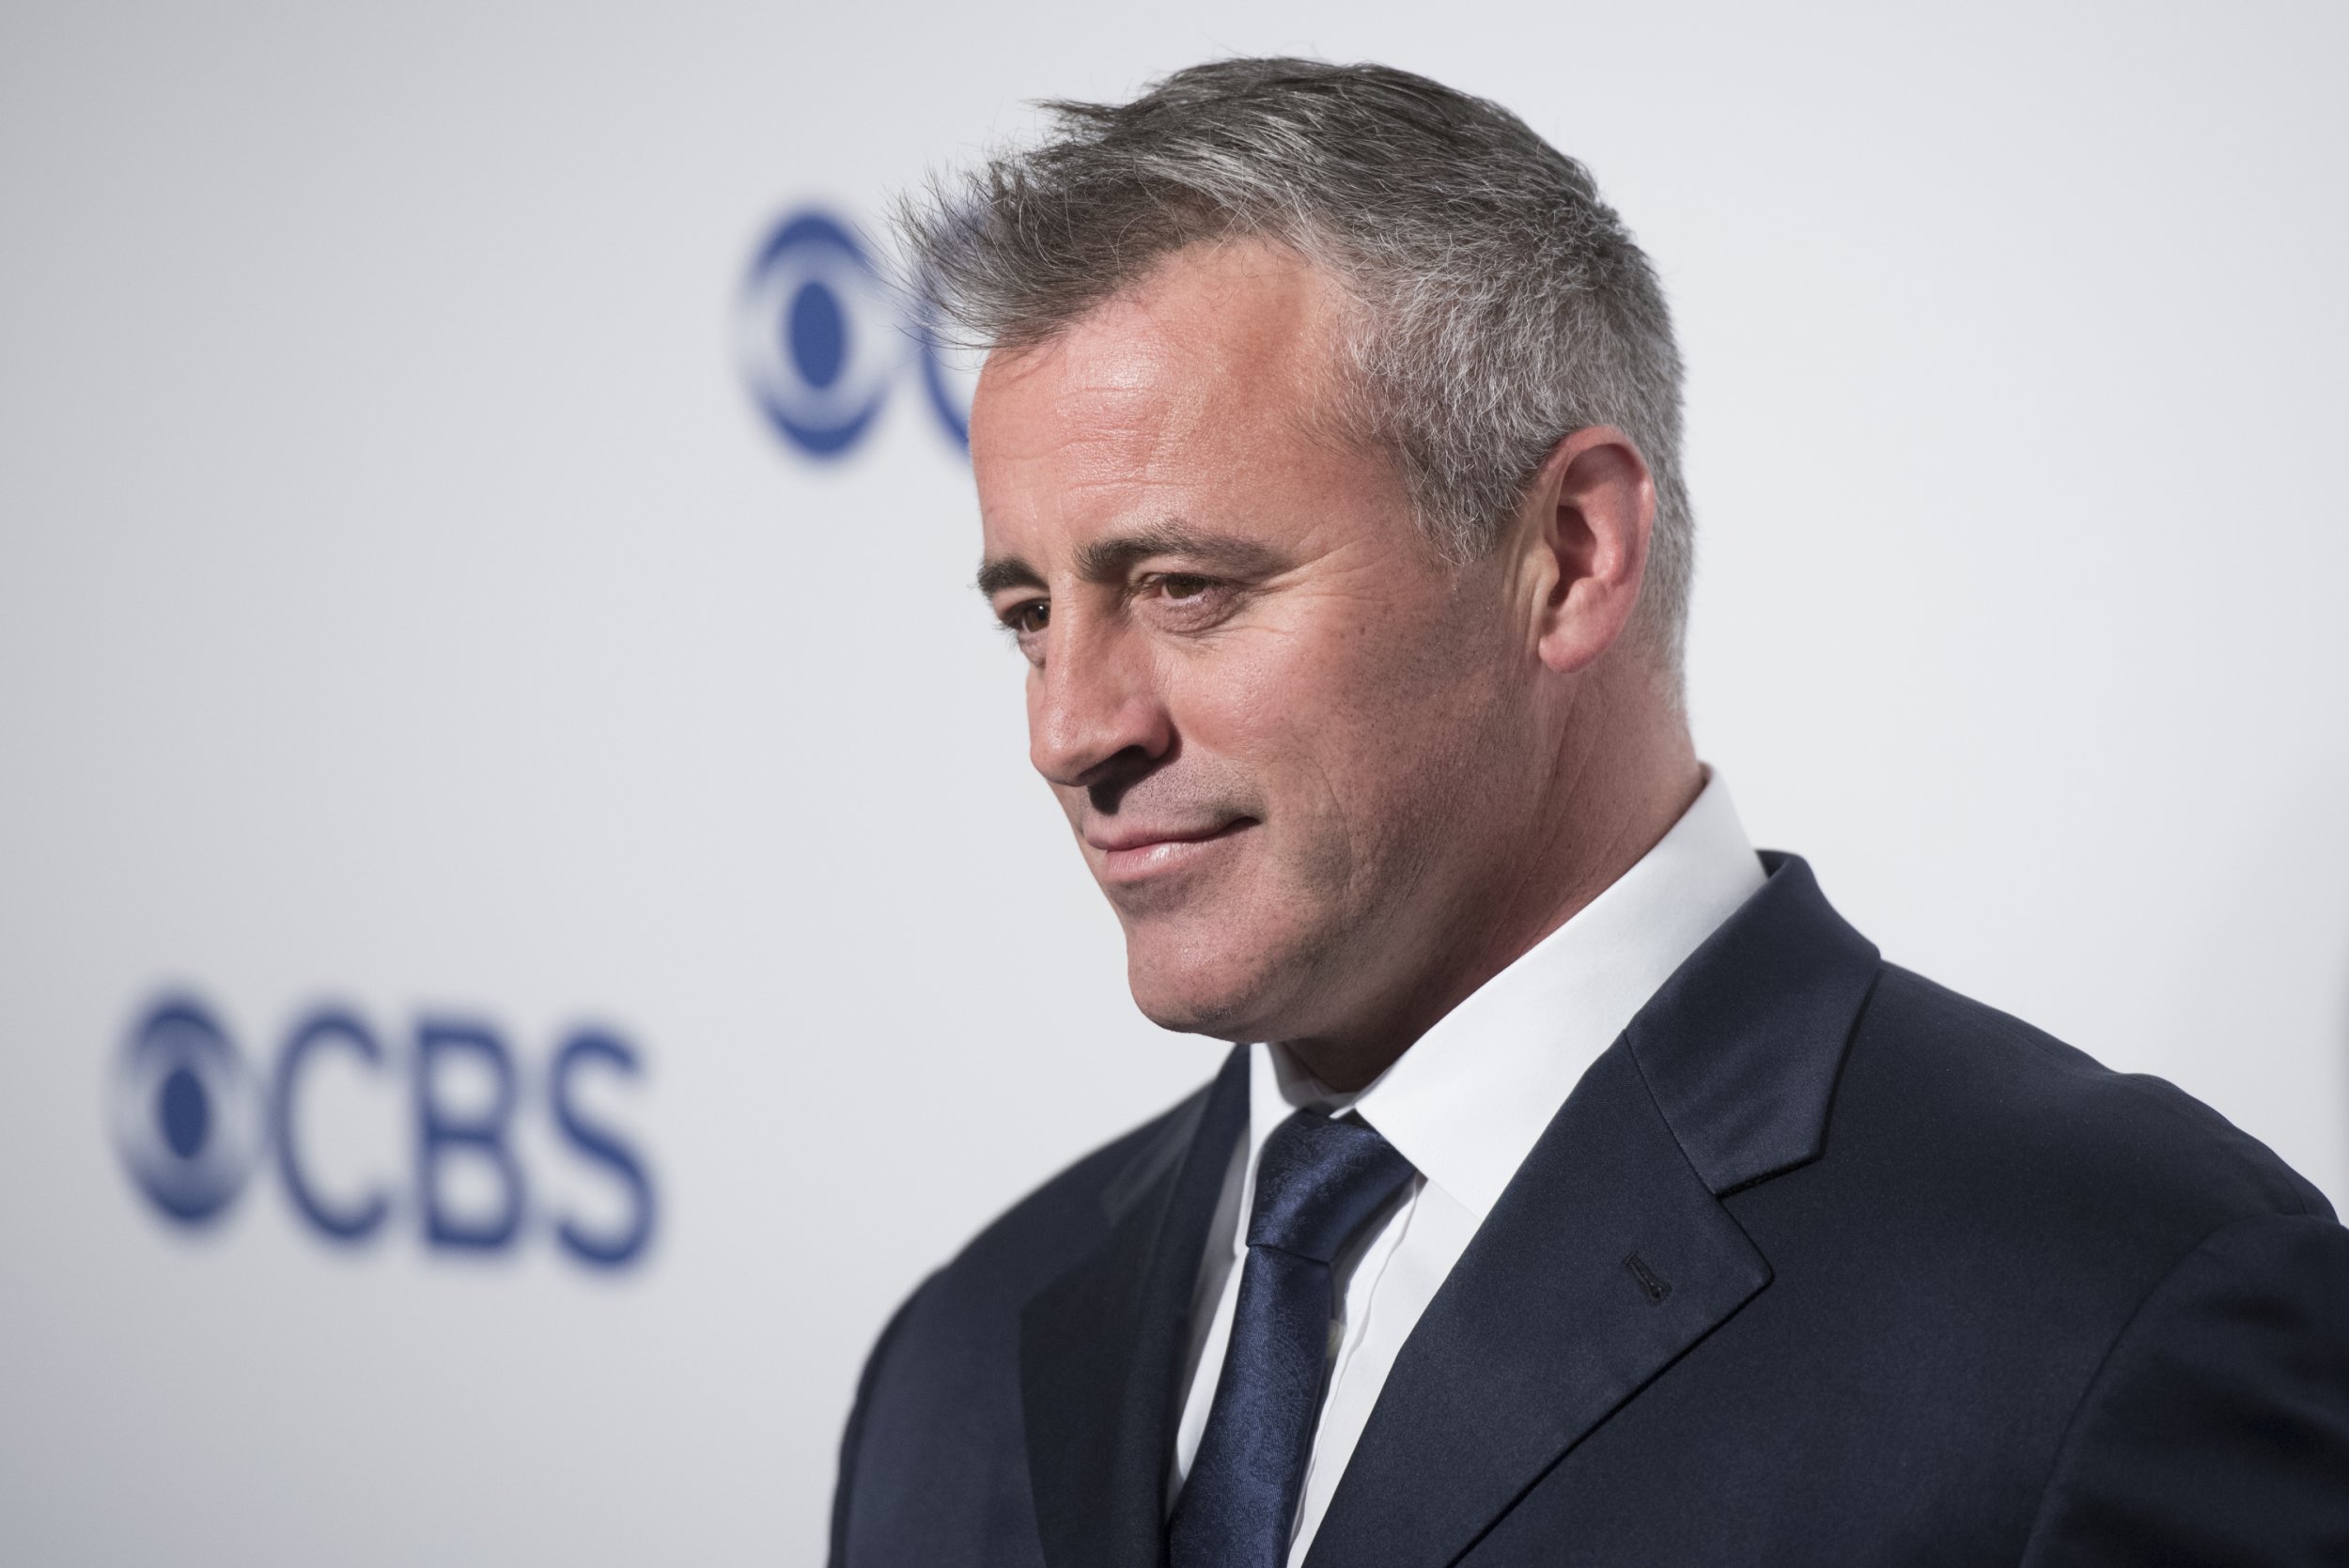 Matt LeBlanc Signs Up for Two More Seasons of 'Top Gear'